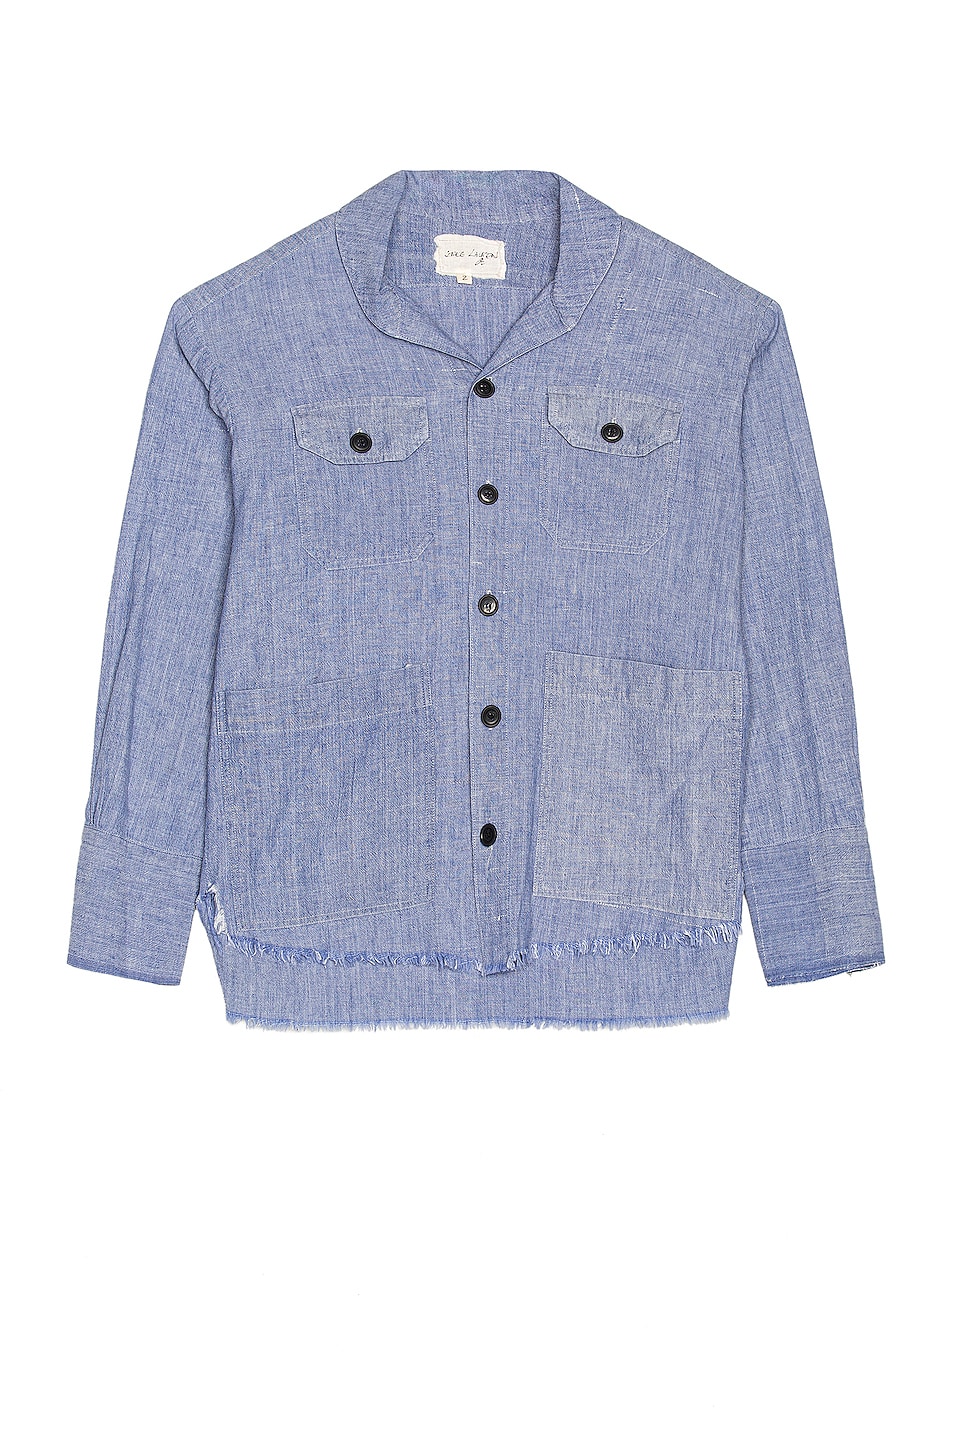 Image 1 of Greg Lauren The Chambray Dress Shirt in Blue